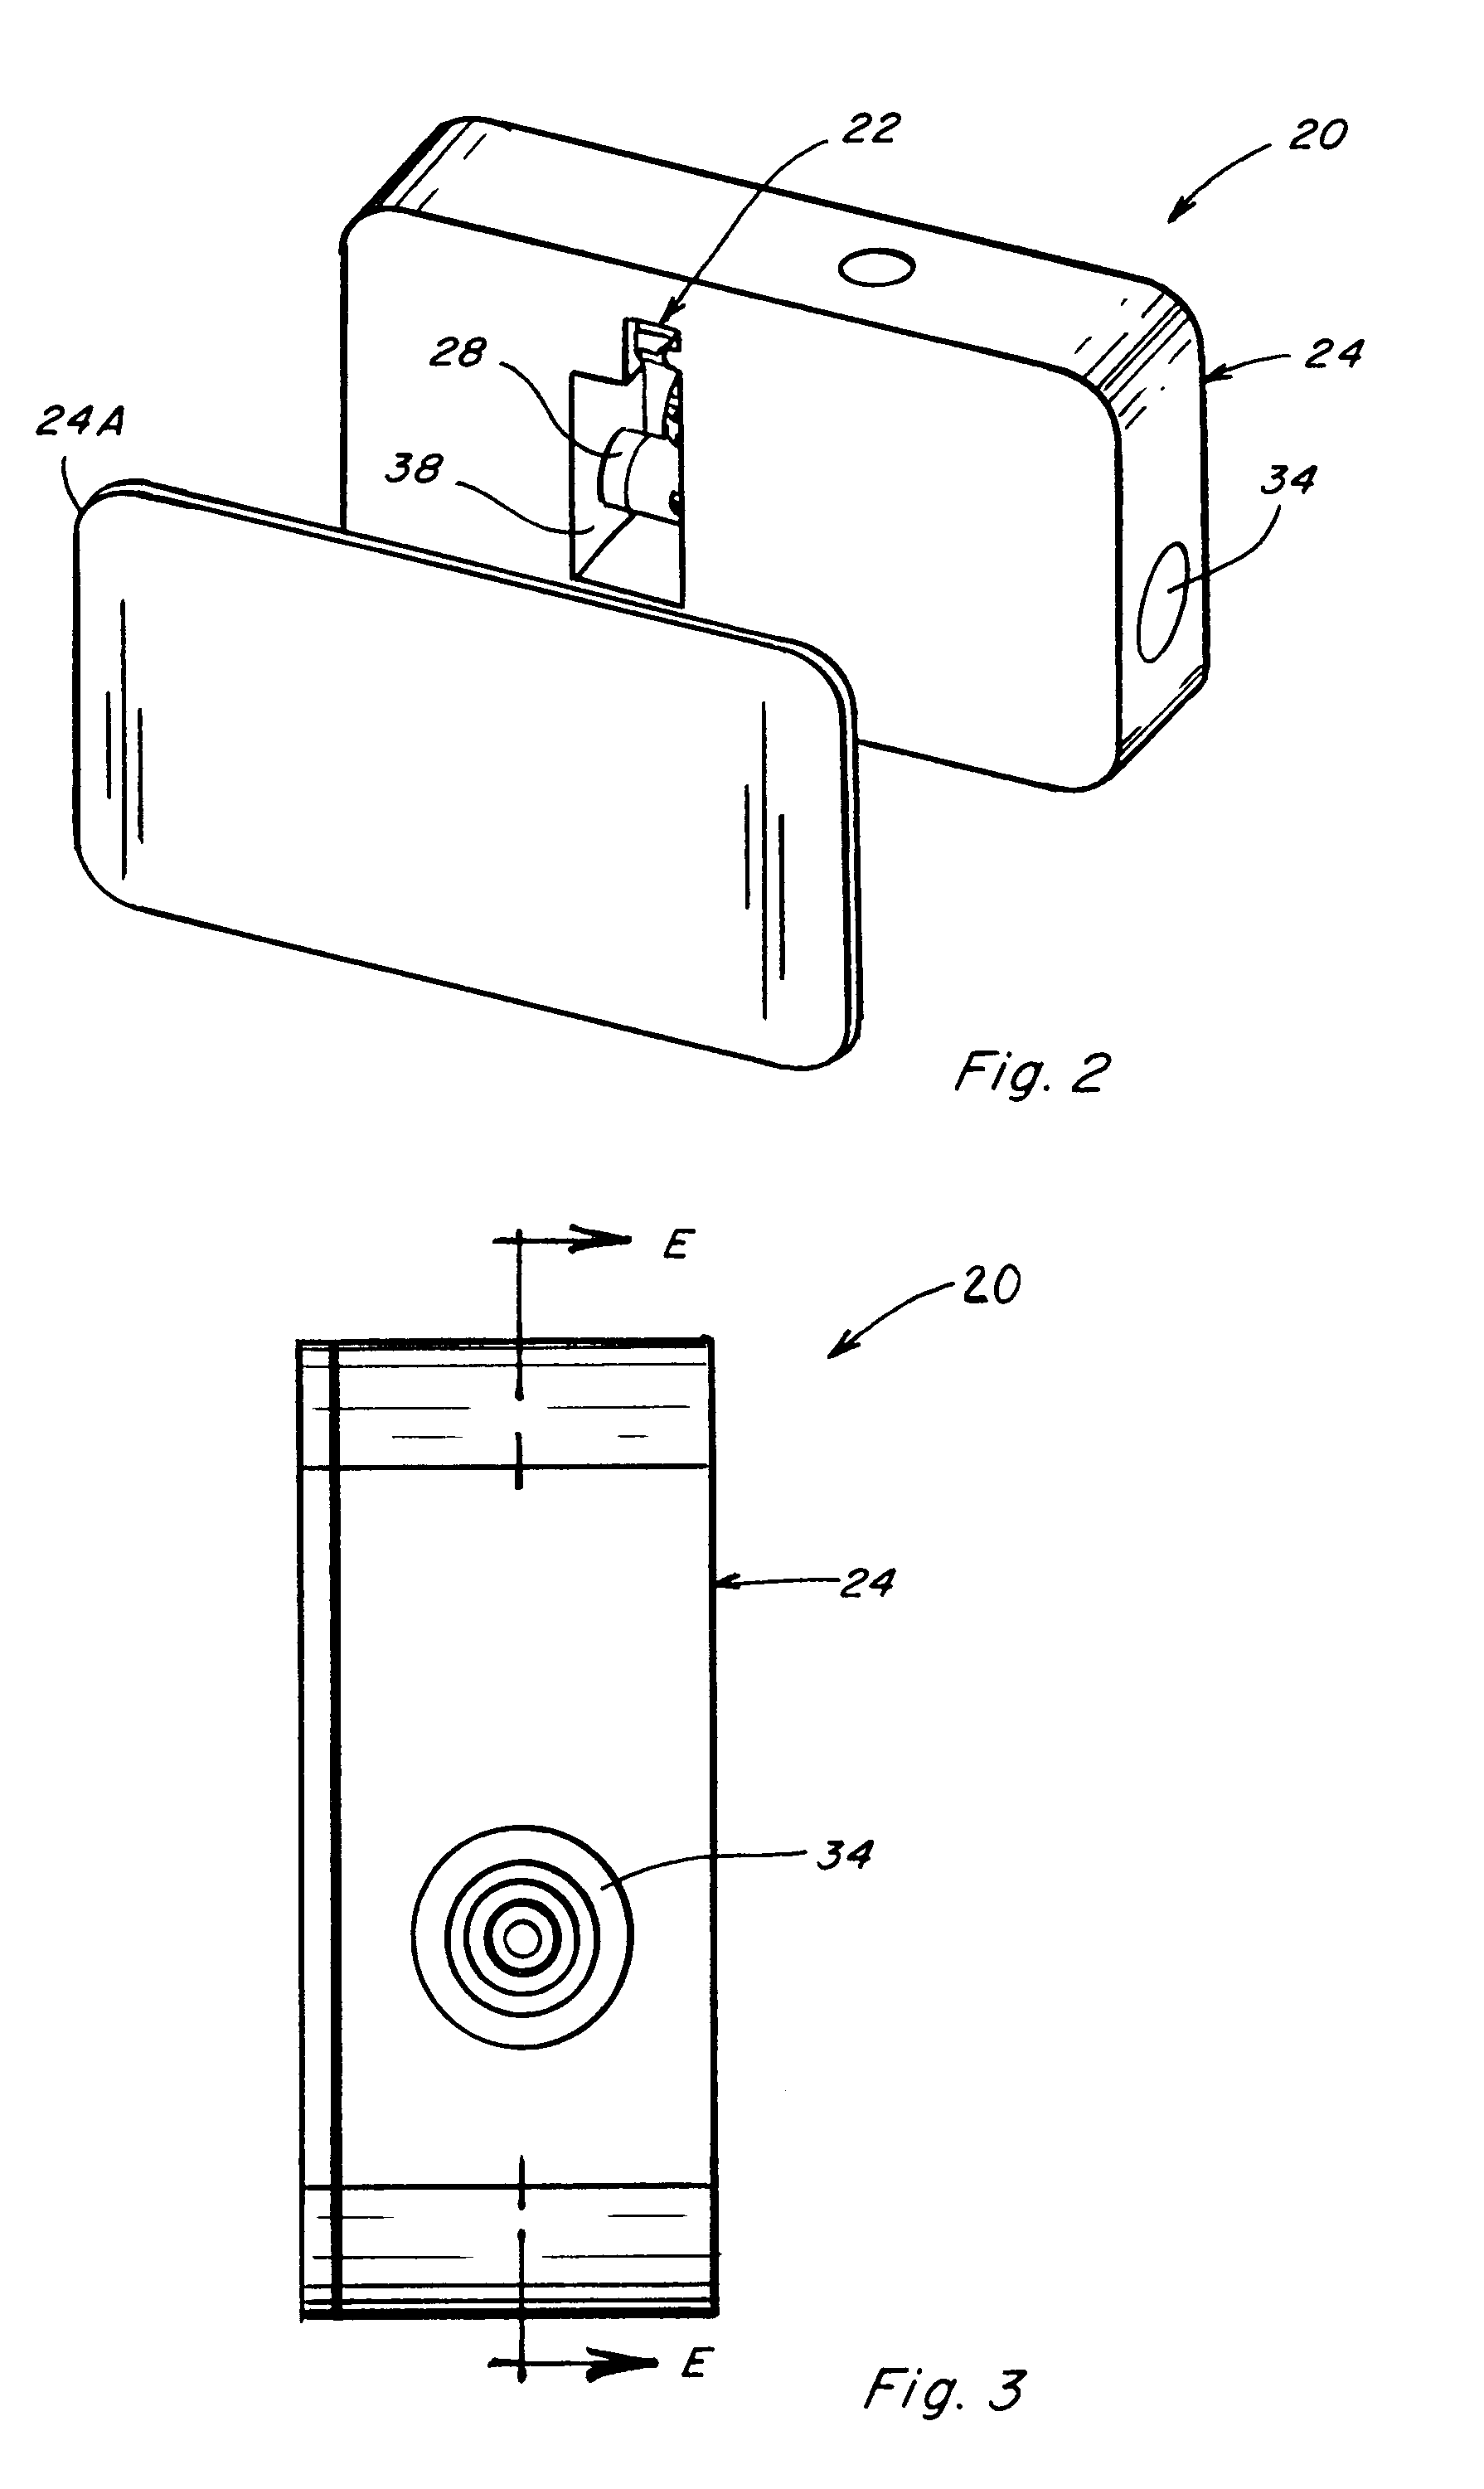 Method and system for attentuating transmission of high amplitude oscillations by a vacuum system